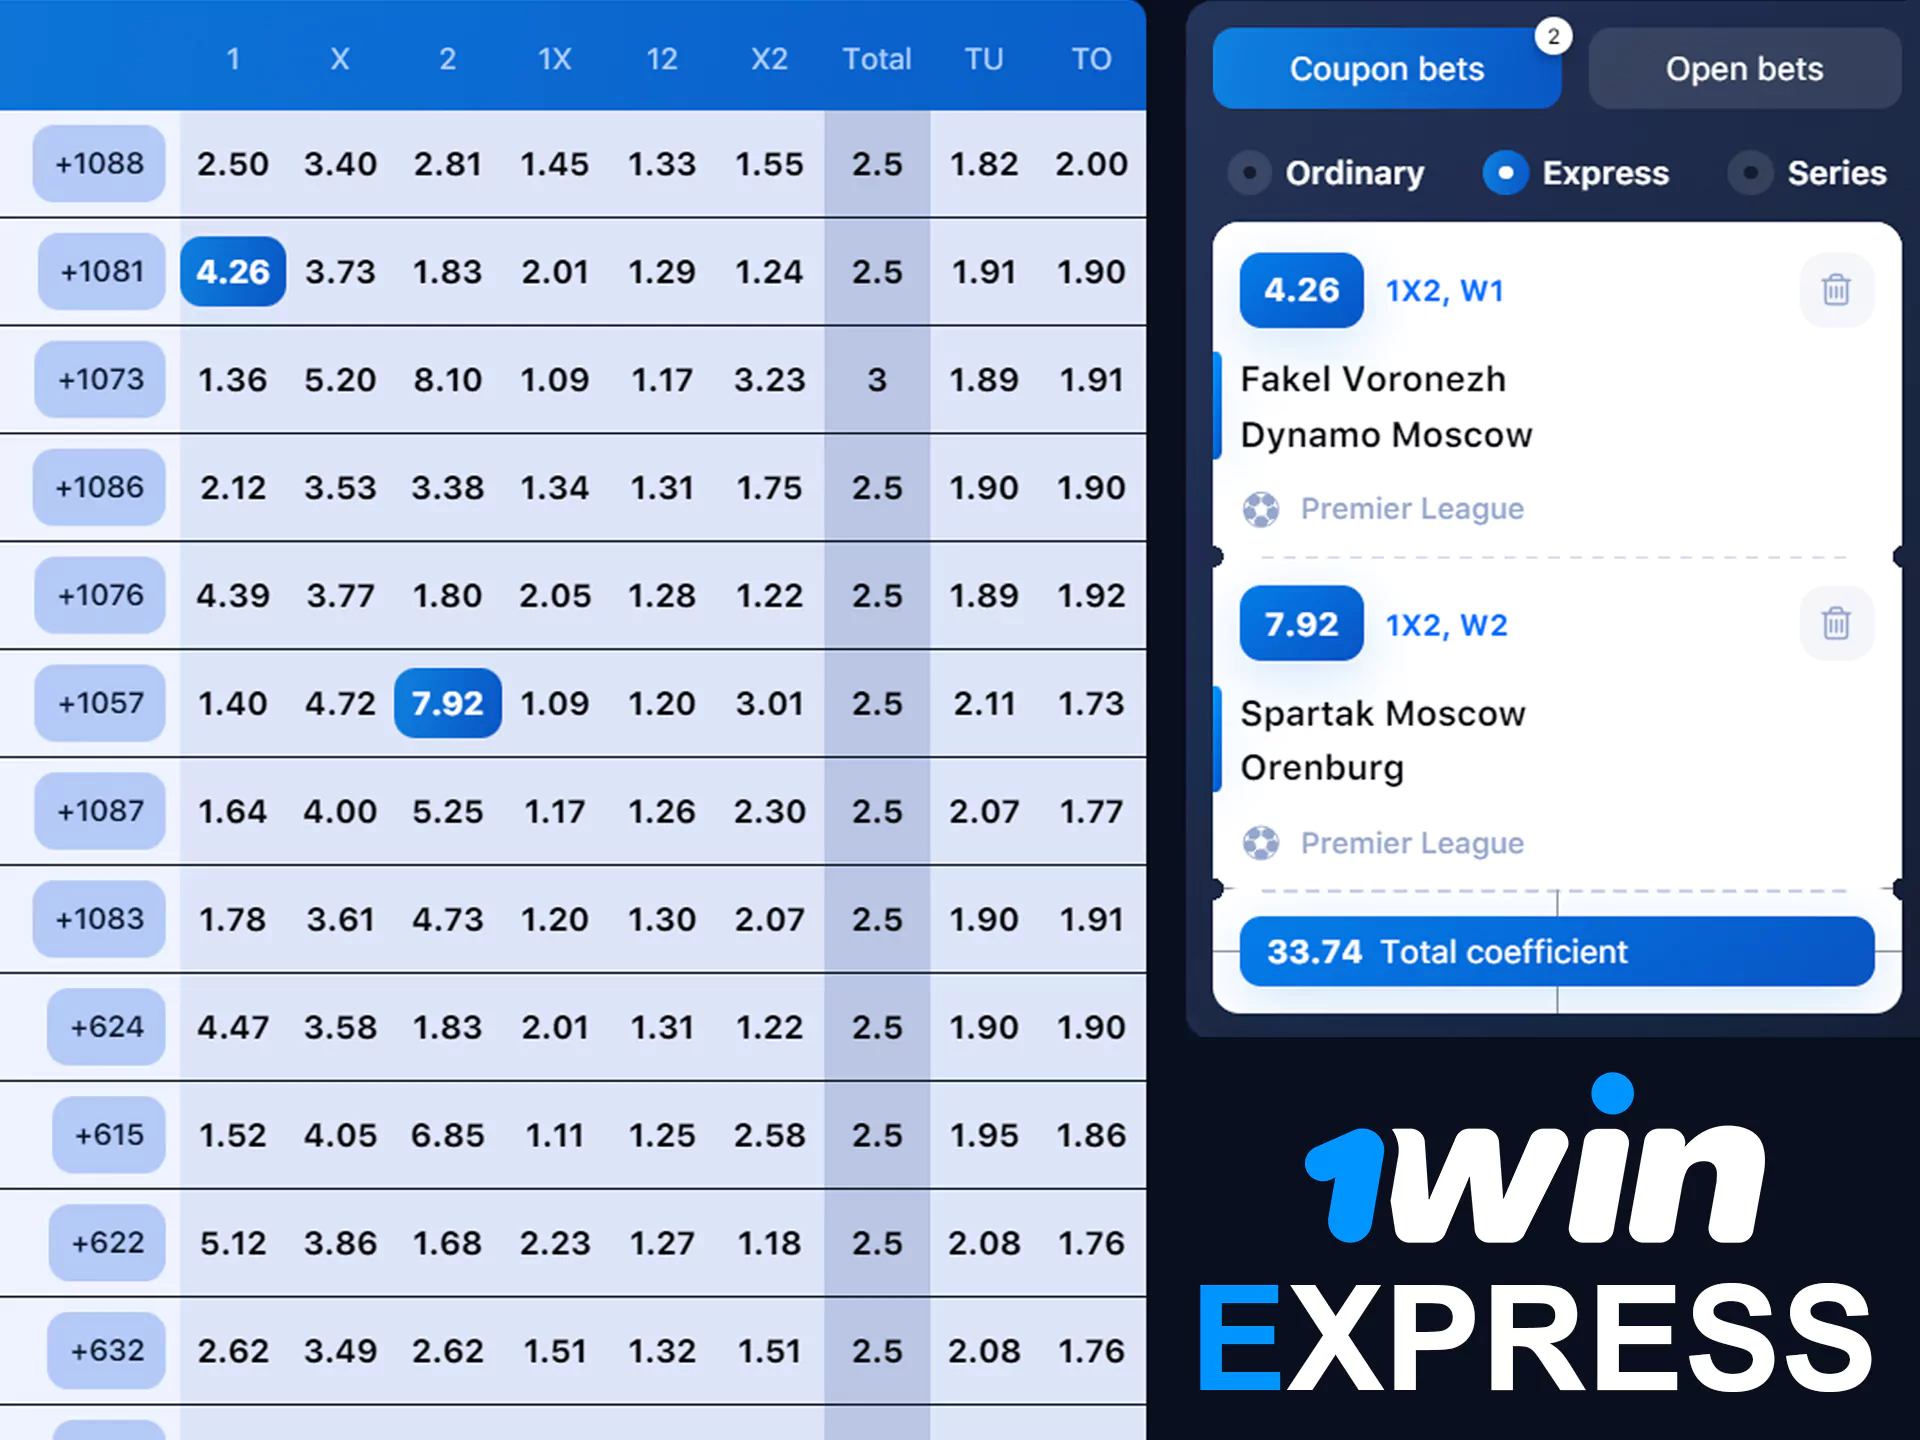 Win big prizes with express type betting.